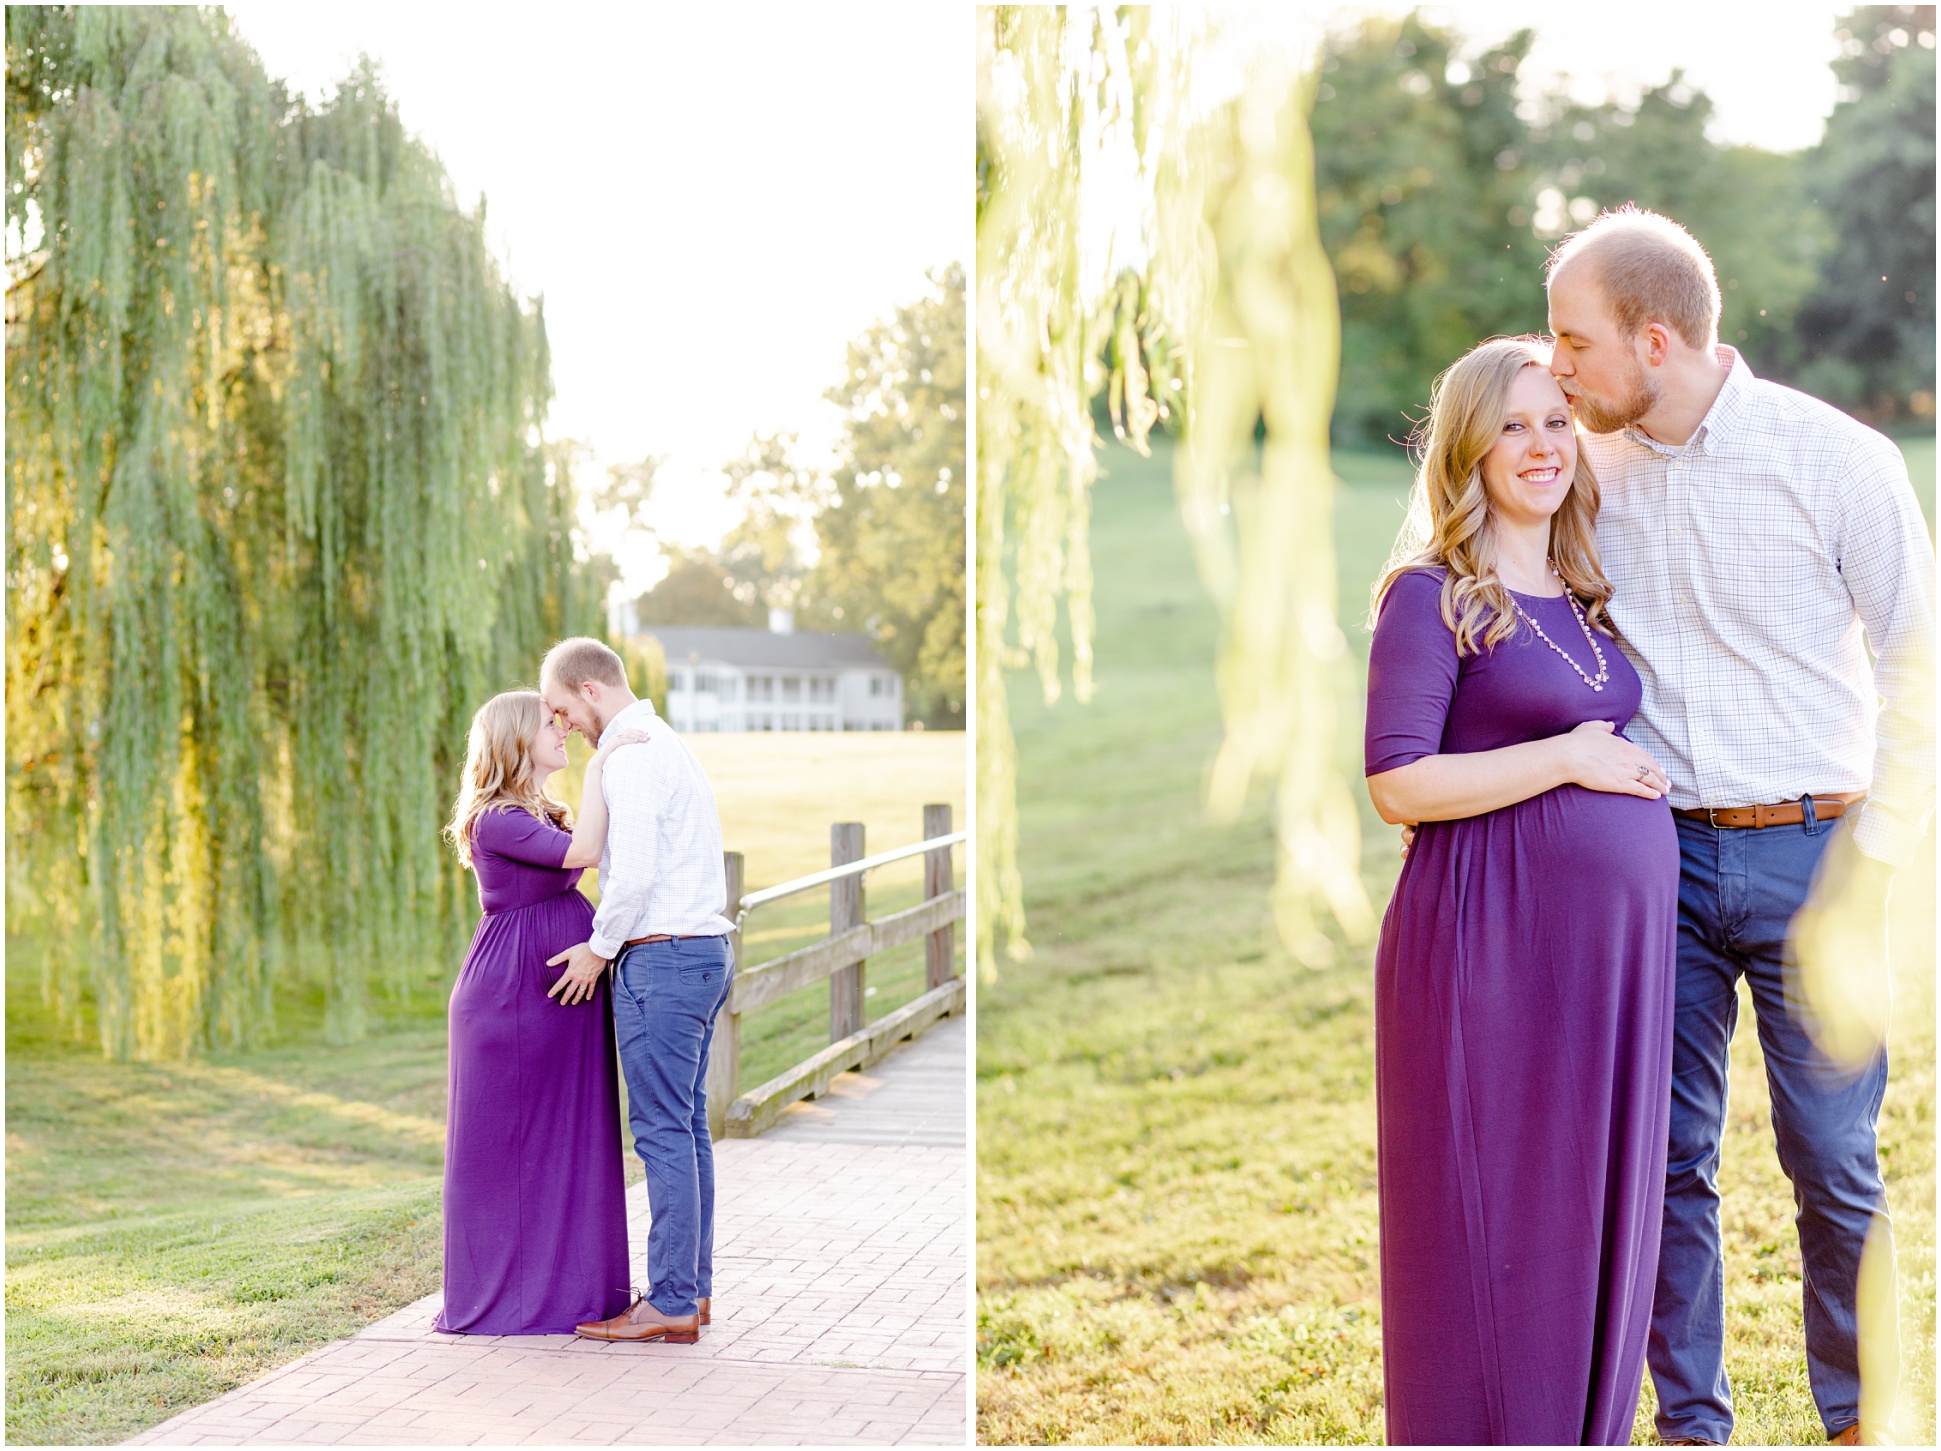 Two images of a maternity session with a purple maternity dress